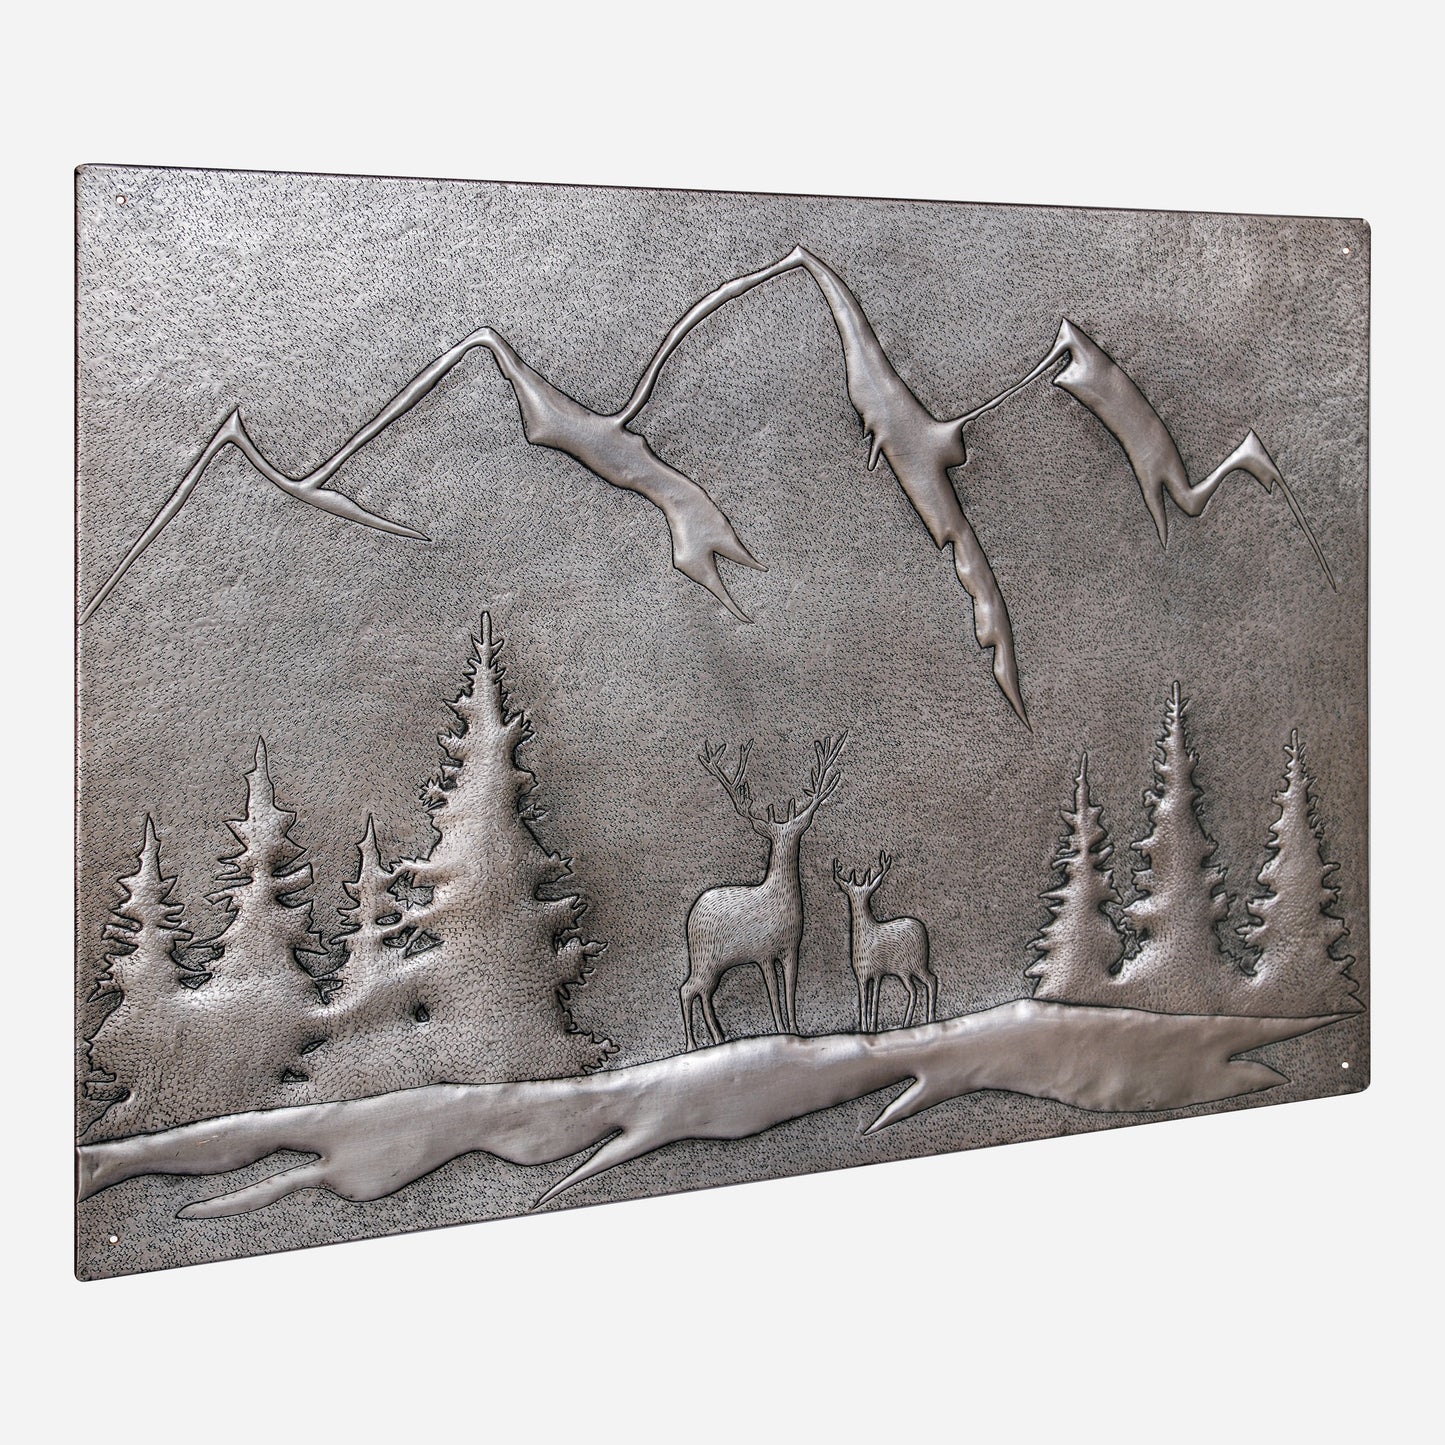 Copper Backsplash Panel (Mountain Behind the Deer in the Forest, Silver Color)